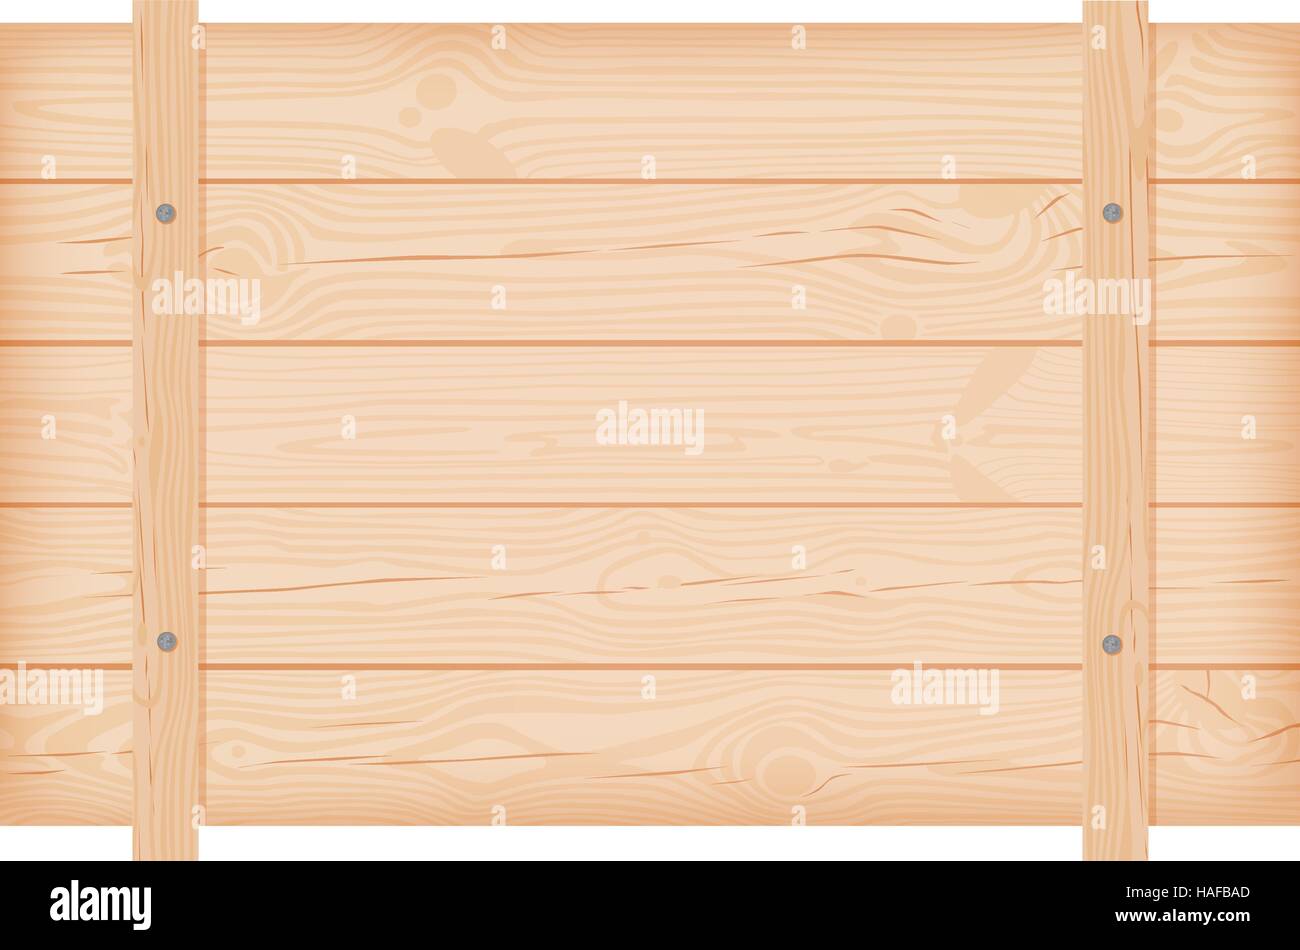 Wooden shipping box with knots,cracks and nails vector illustration Stock Vector